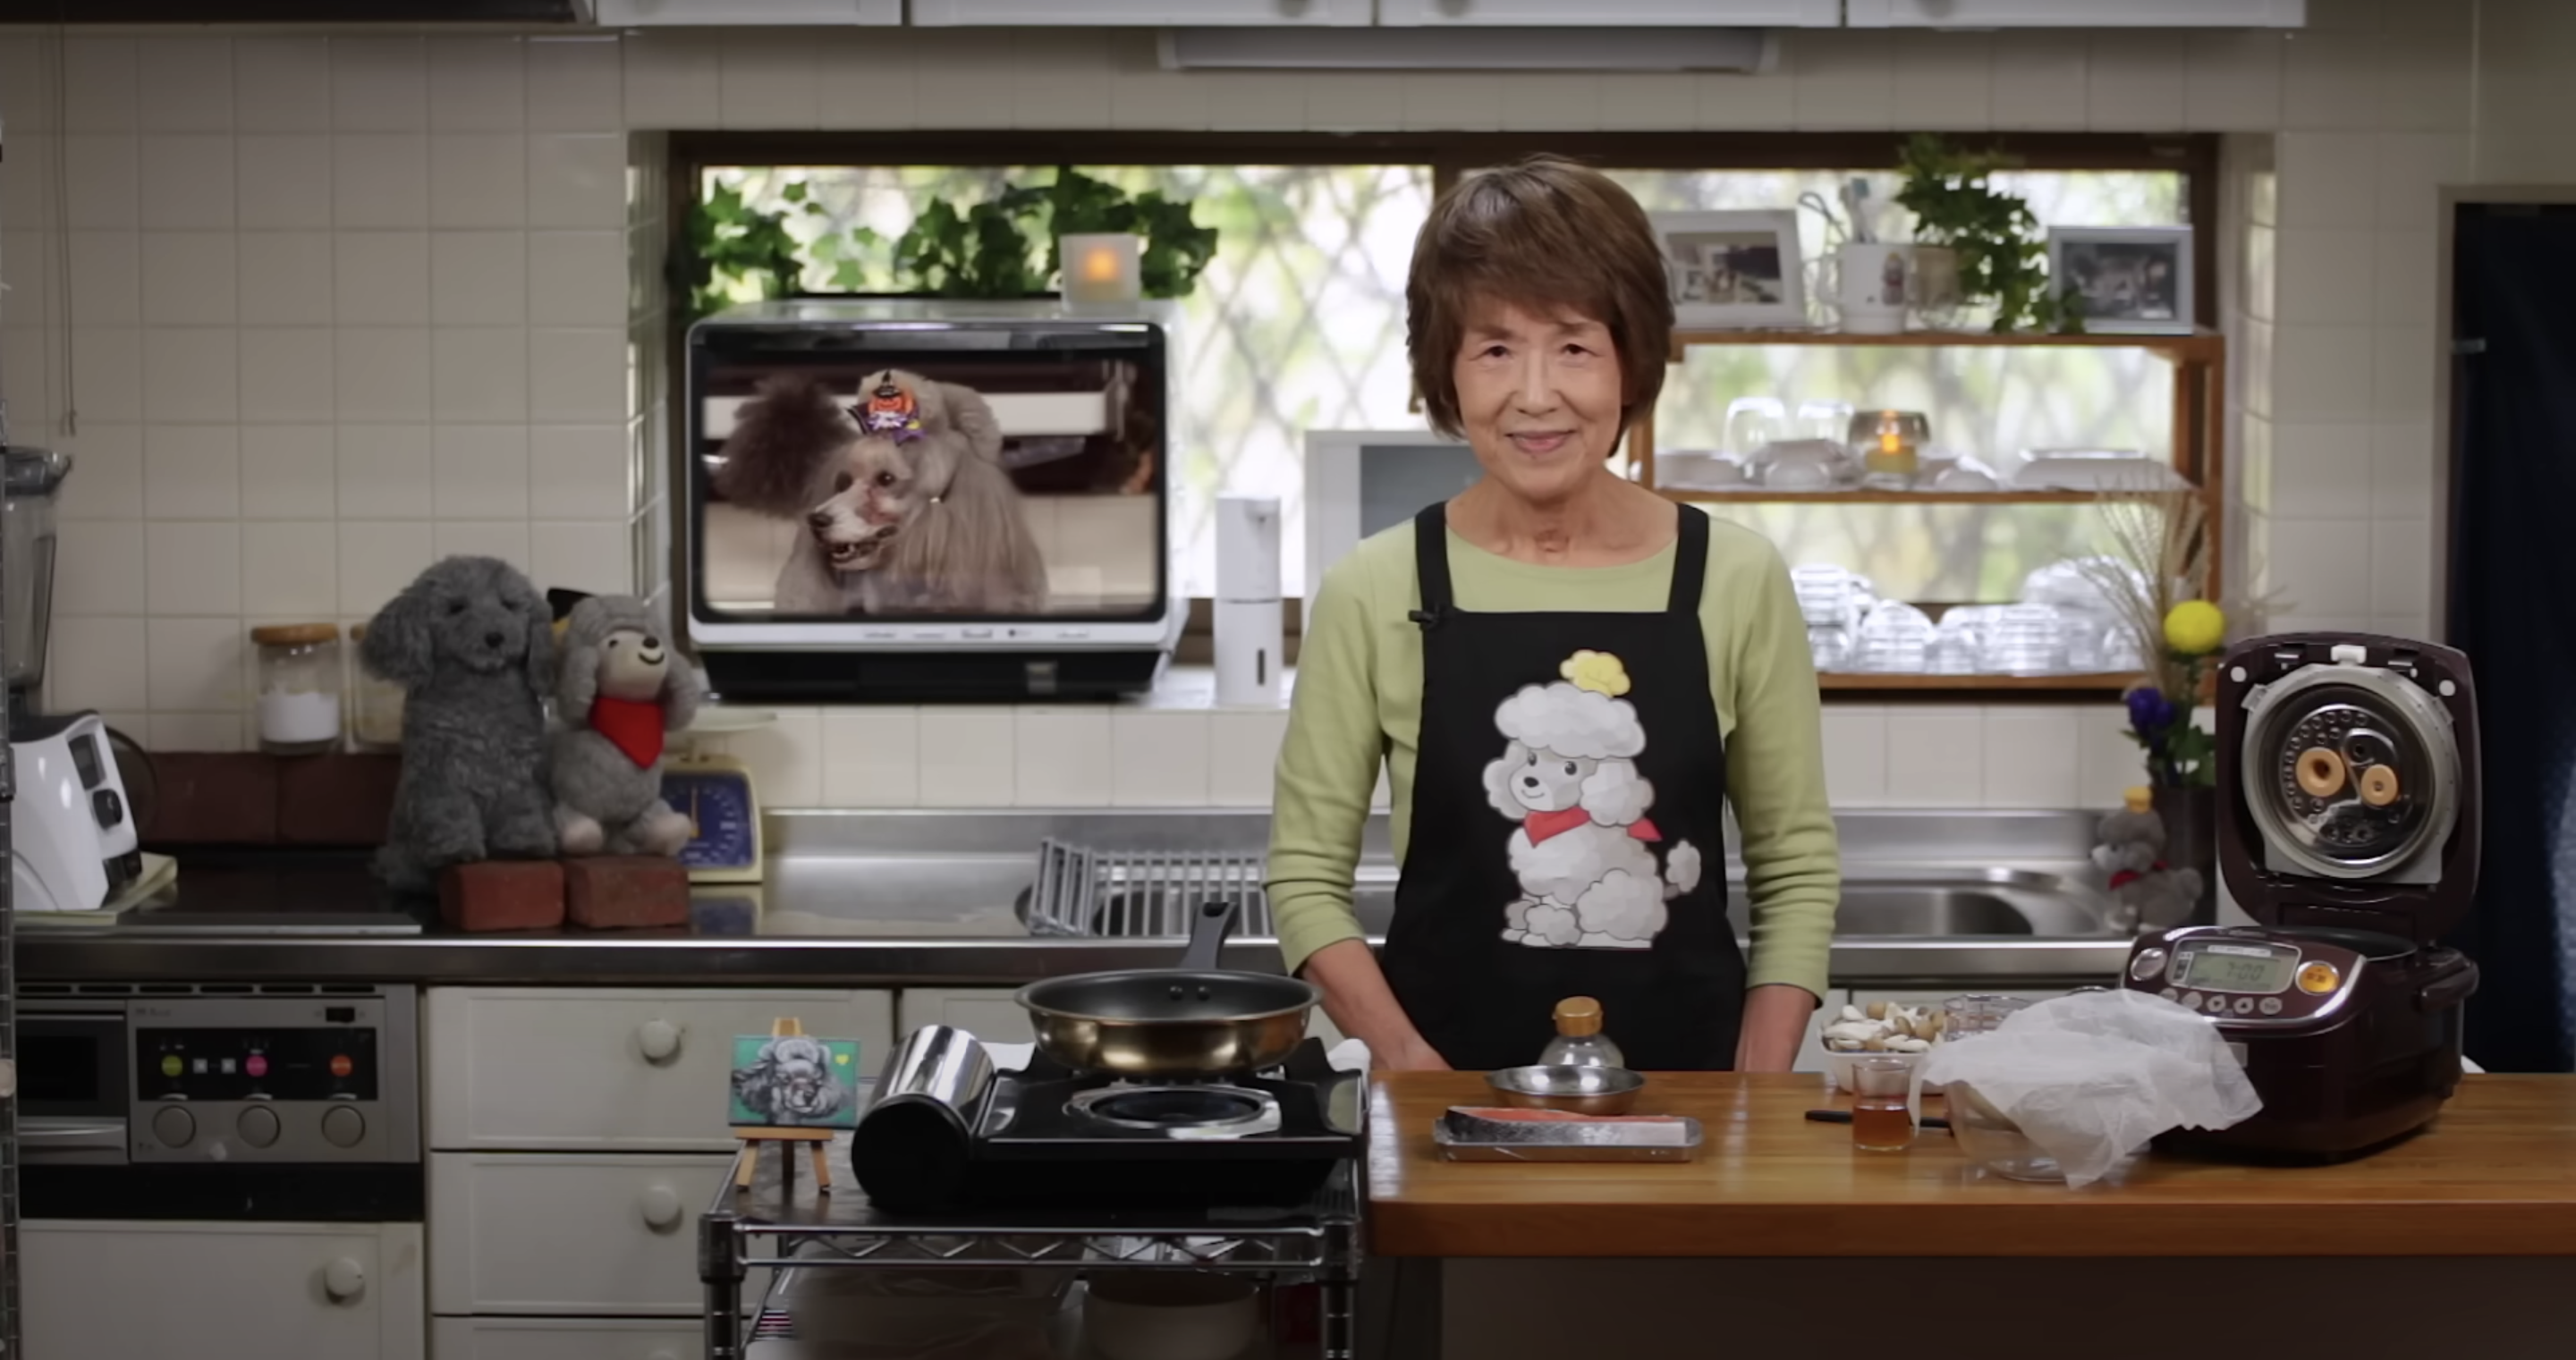 Image of Chef and Francis from "Cooking with Dog" in a kitchen, from YouTube video "Salmon & Mushroom Rice Cooker Recipe for Takikomi Gohan Mixed Rice"